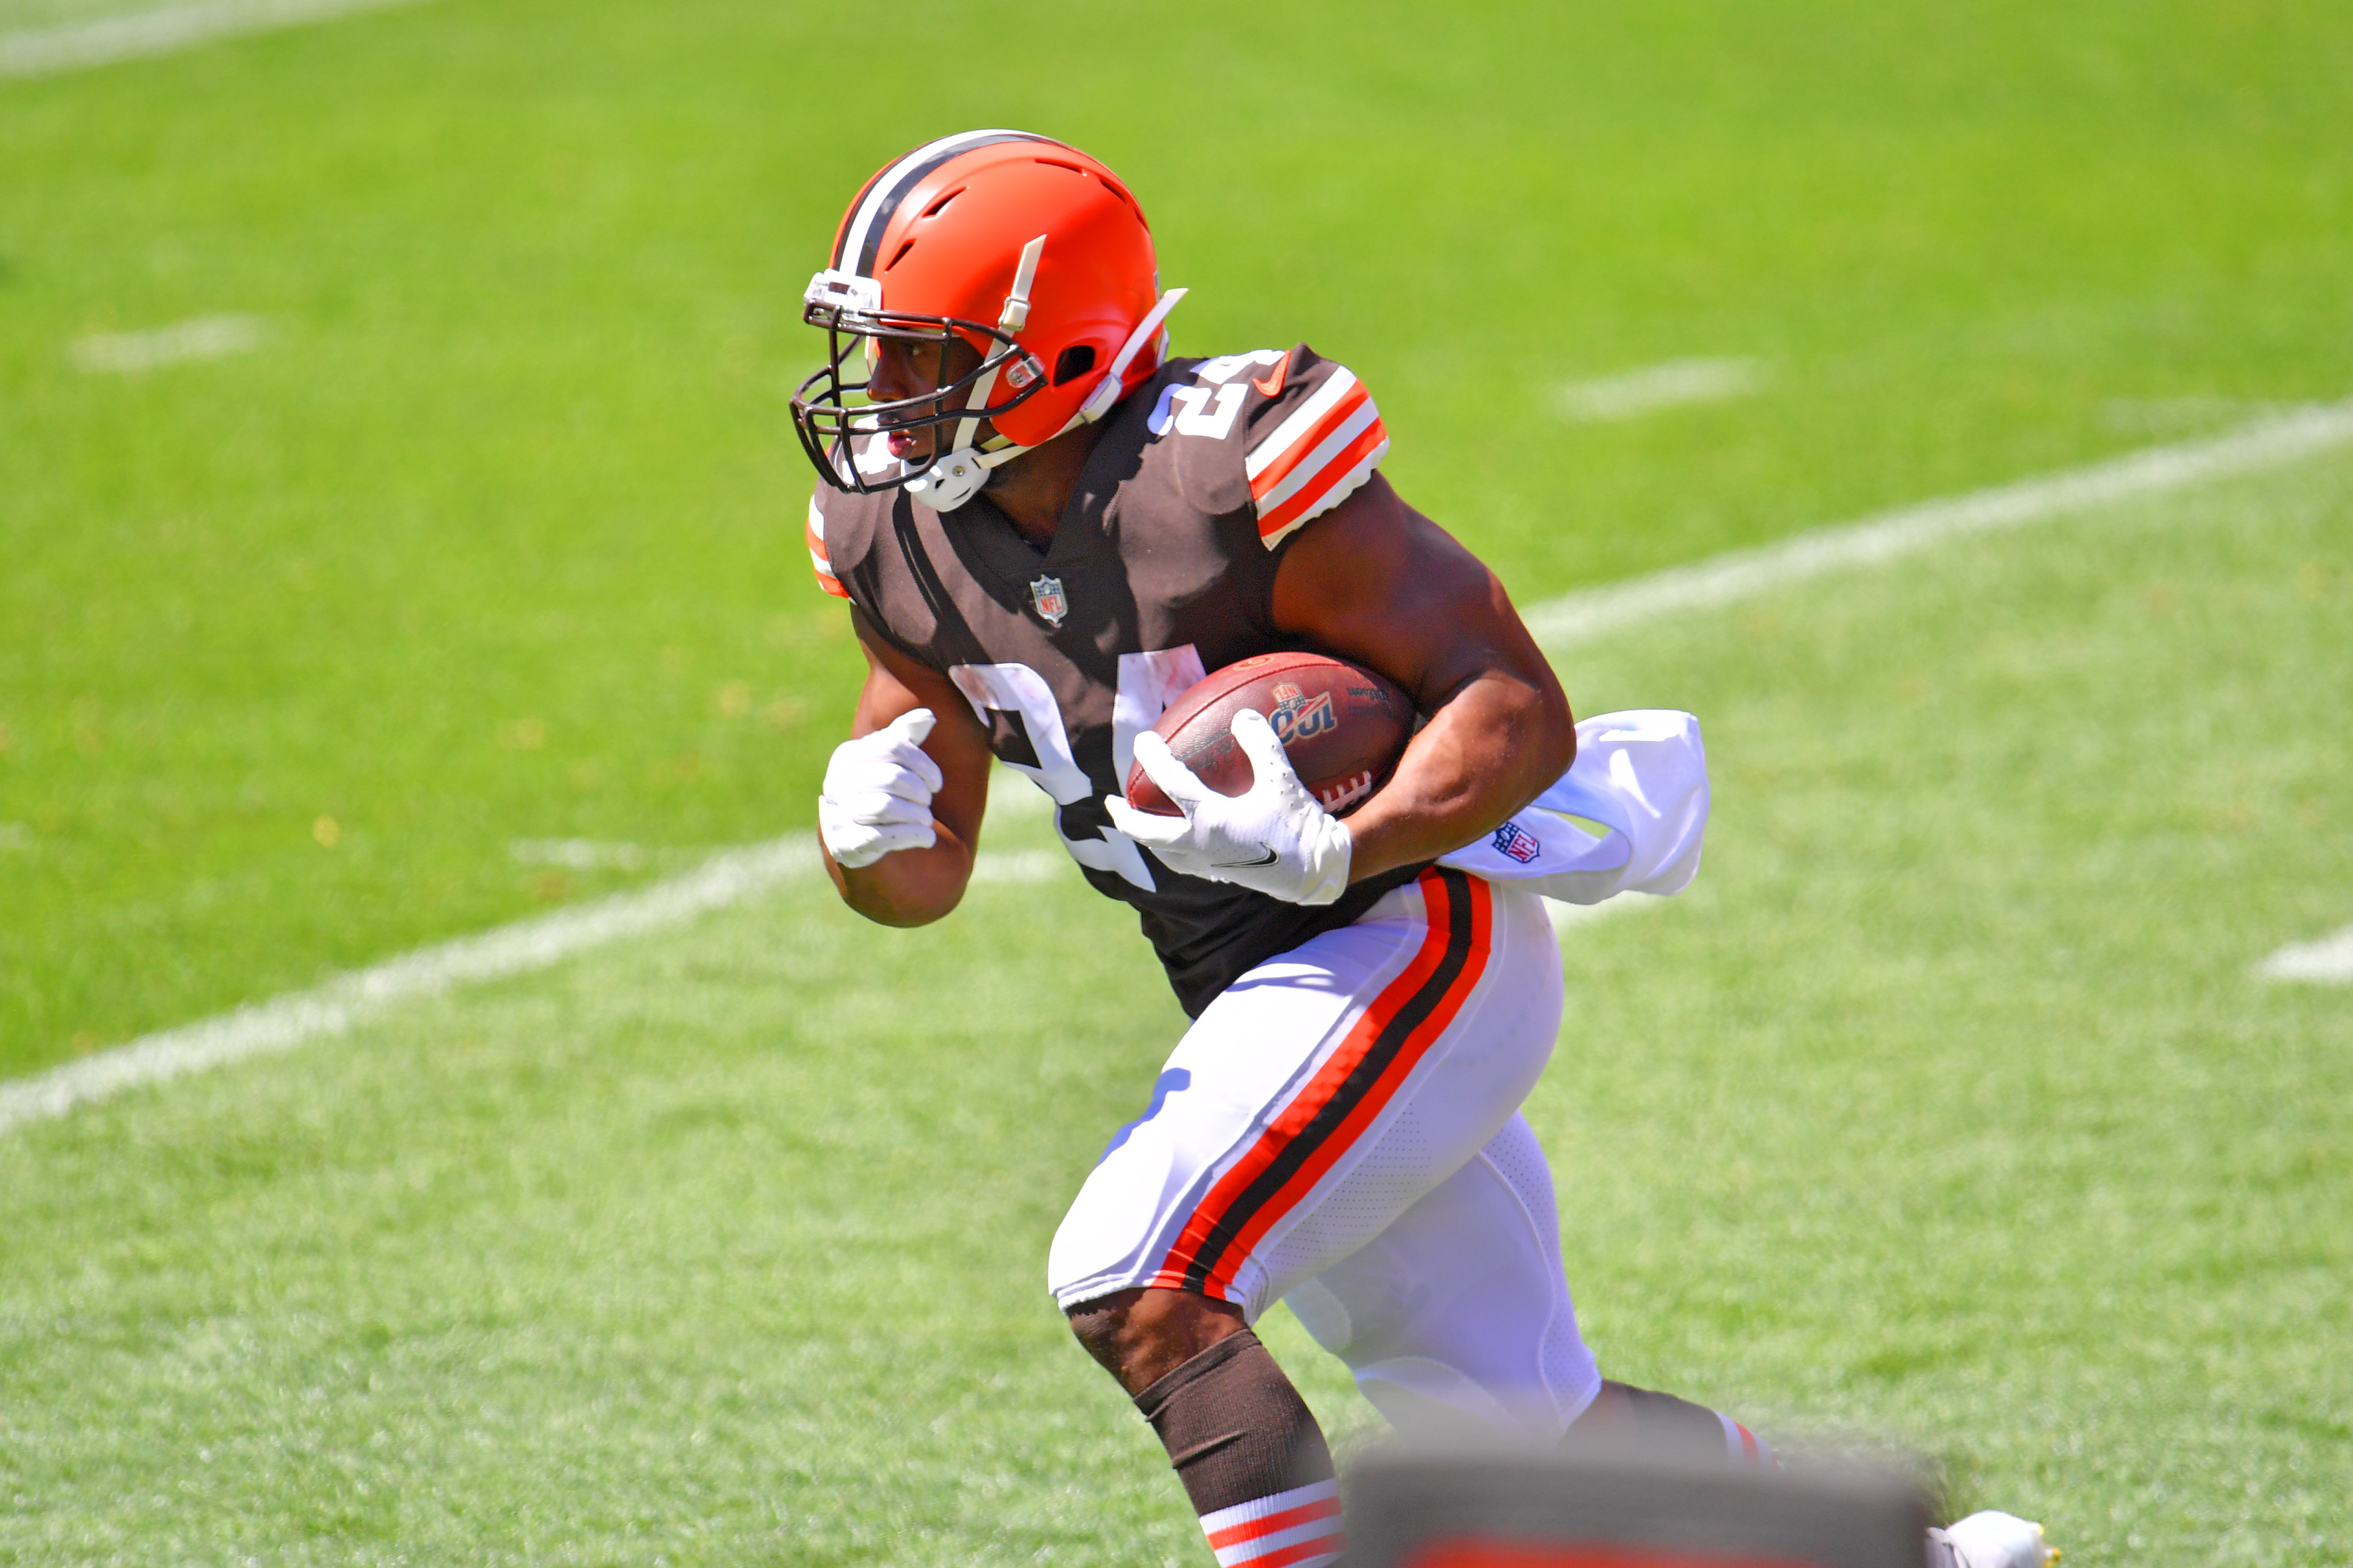 Cleveland Browns: Nick Chubb extension further proof of turnaround